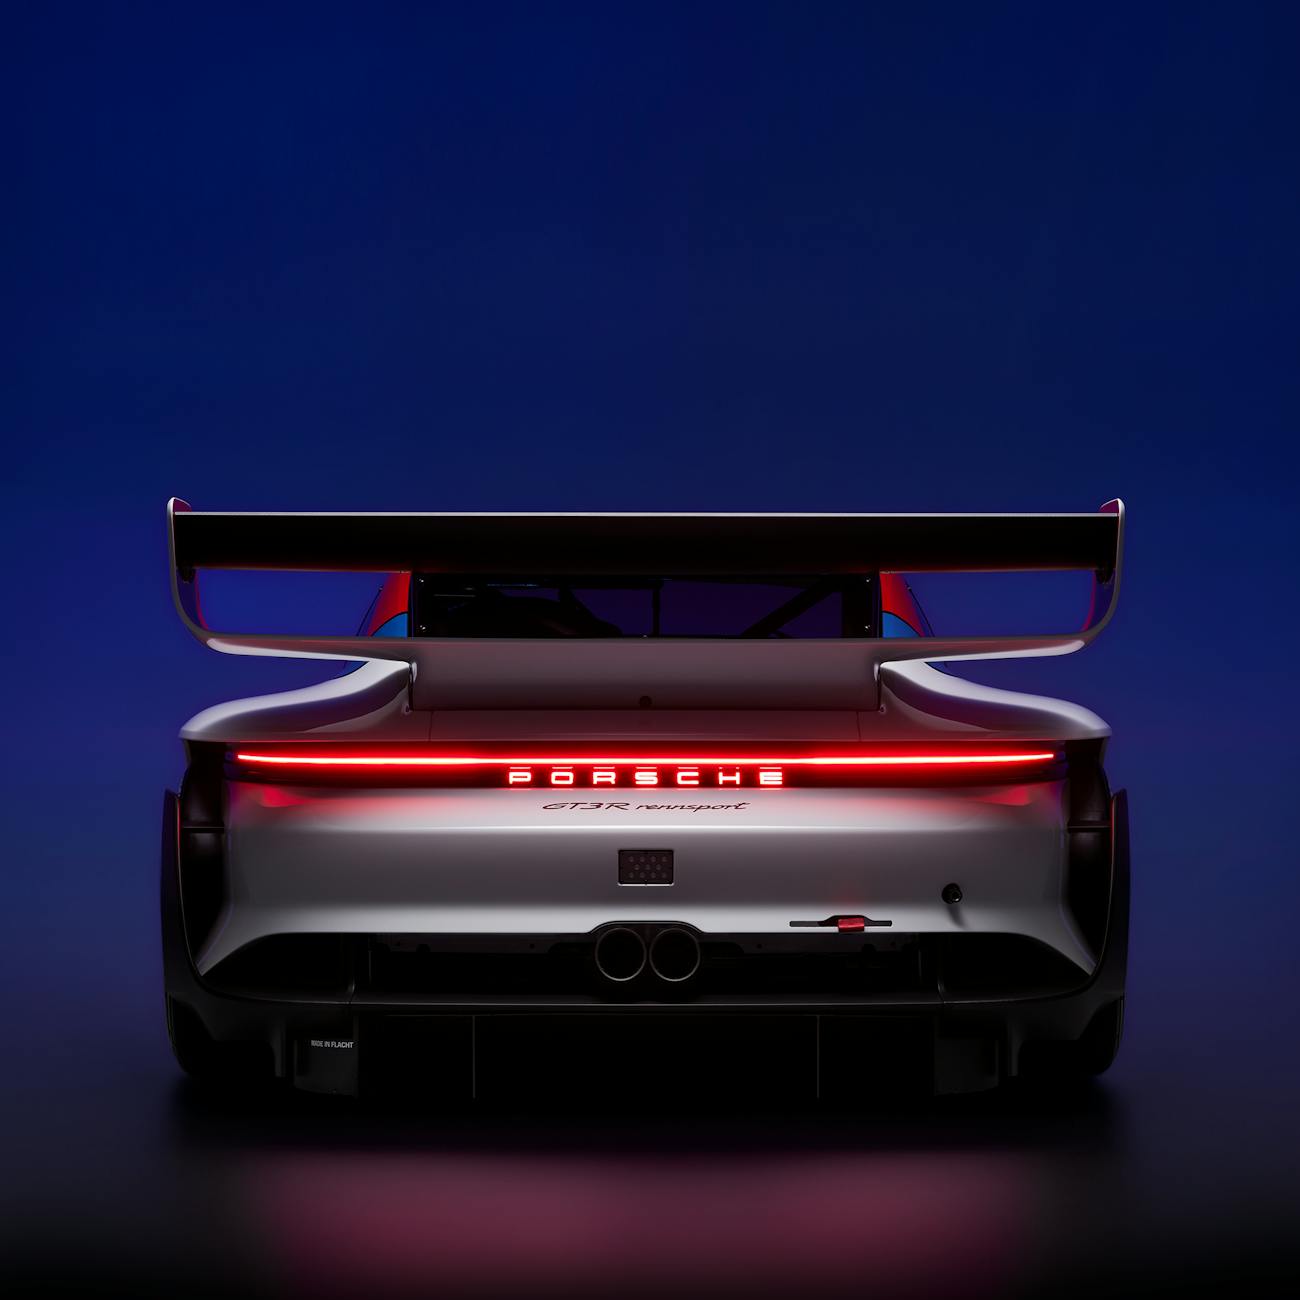 Porsche GT3 R rennsport race car, rear view with illuminated taillights